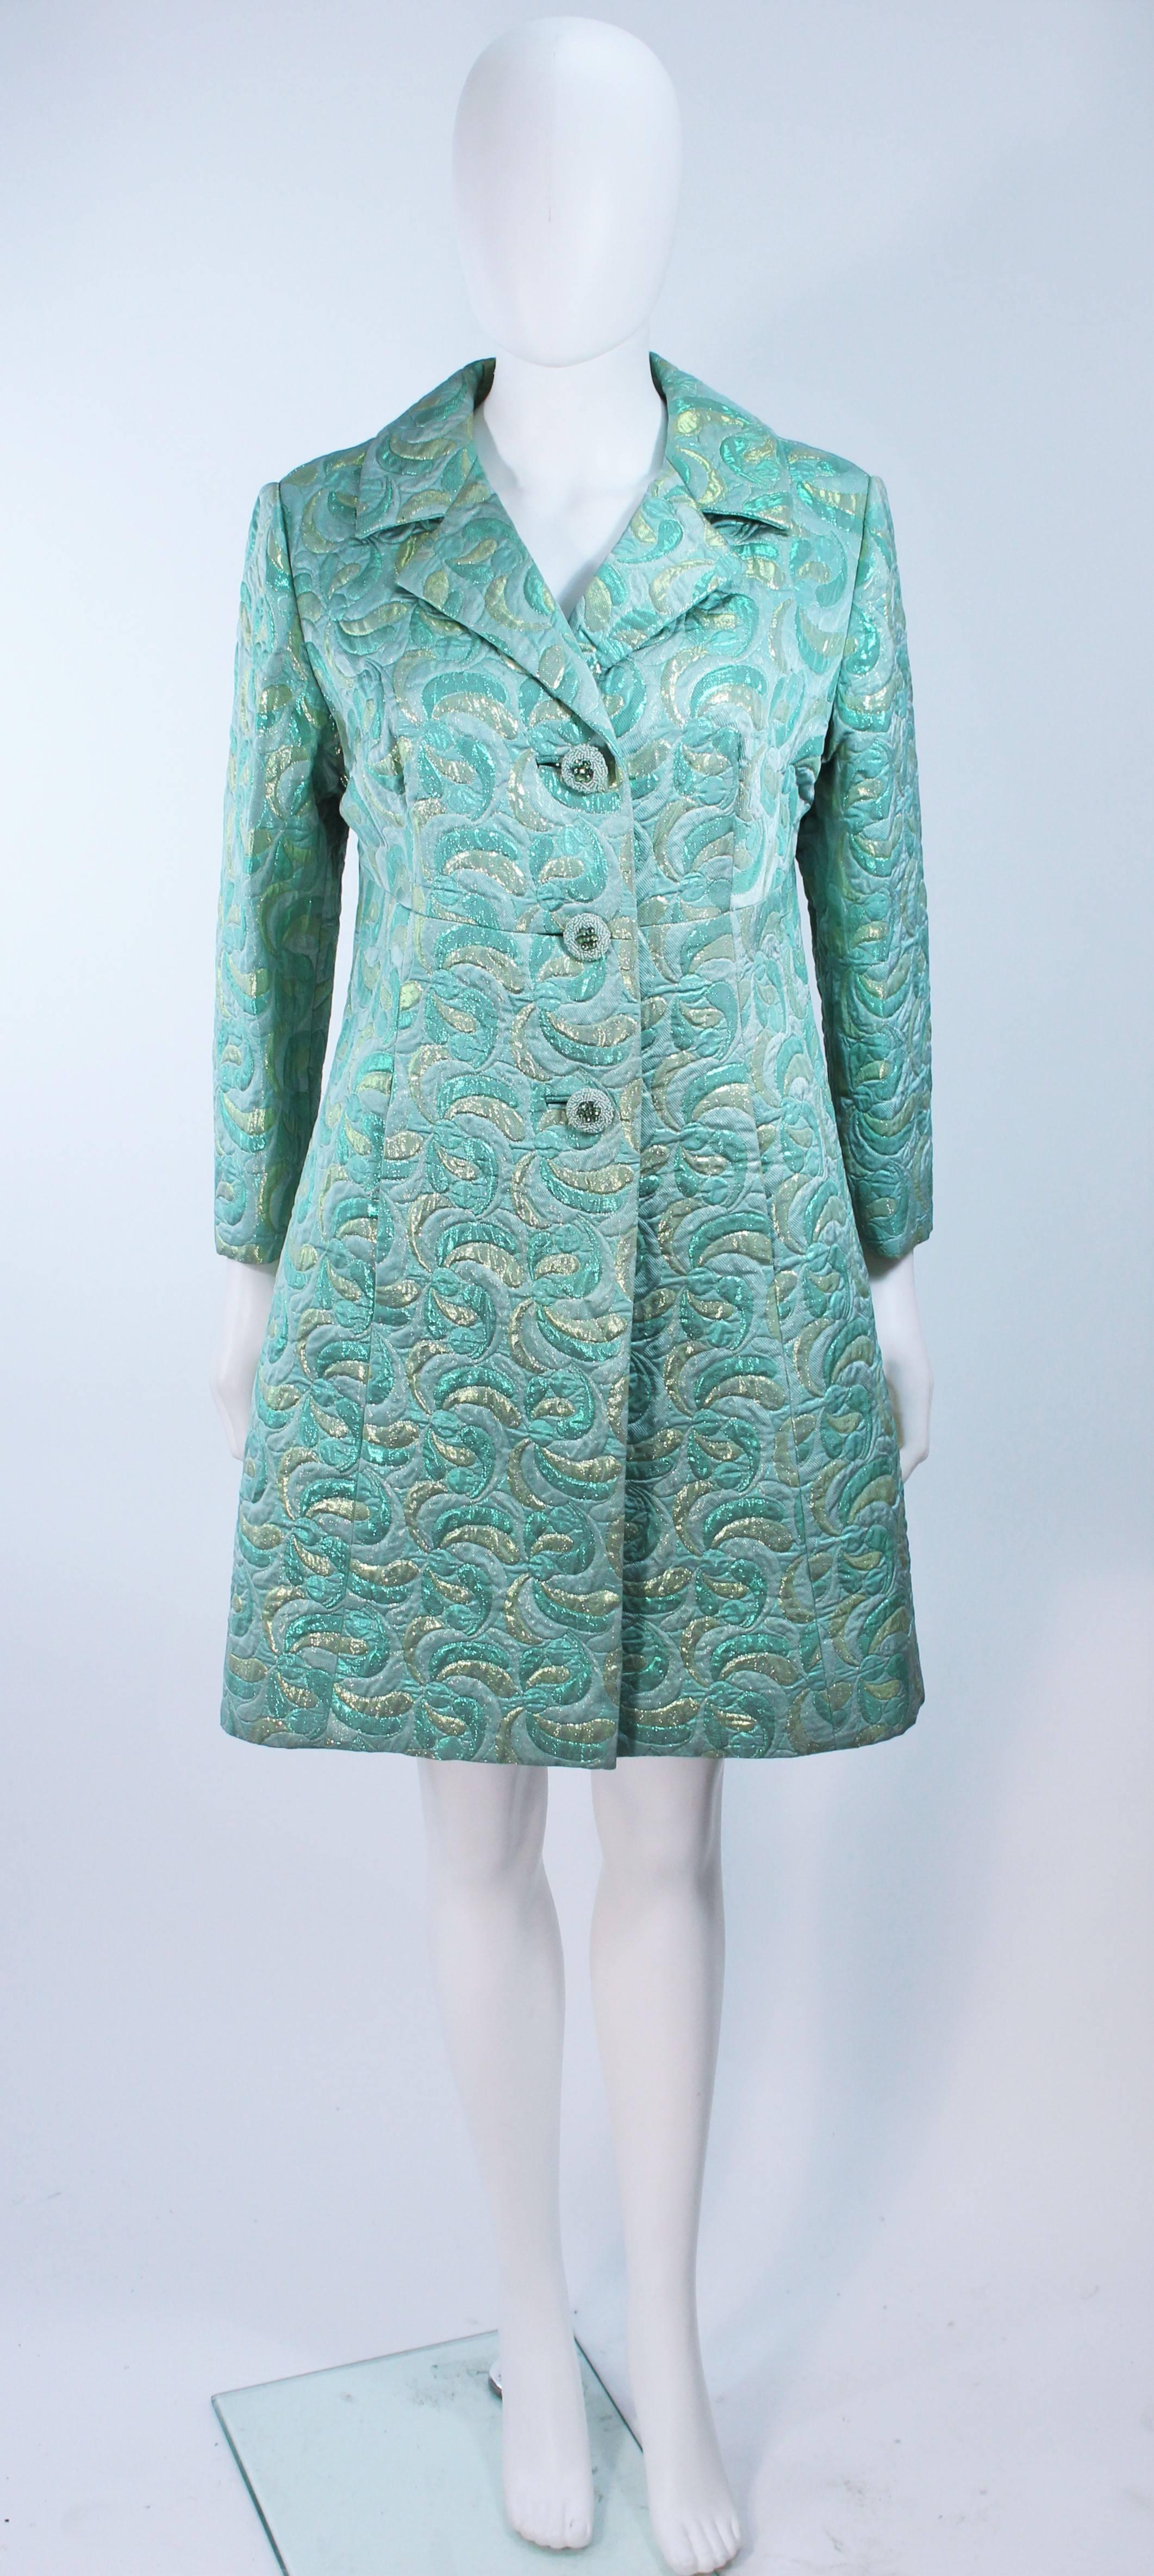  This coat is composed of an aqua metallic brocade. Features beaded buttons at the center front with side pockets. In great vintage condition.

  **Please cross-reference measurements for personal accuracy. Size in description box is an